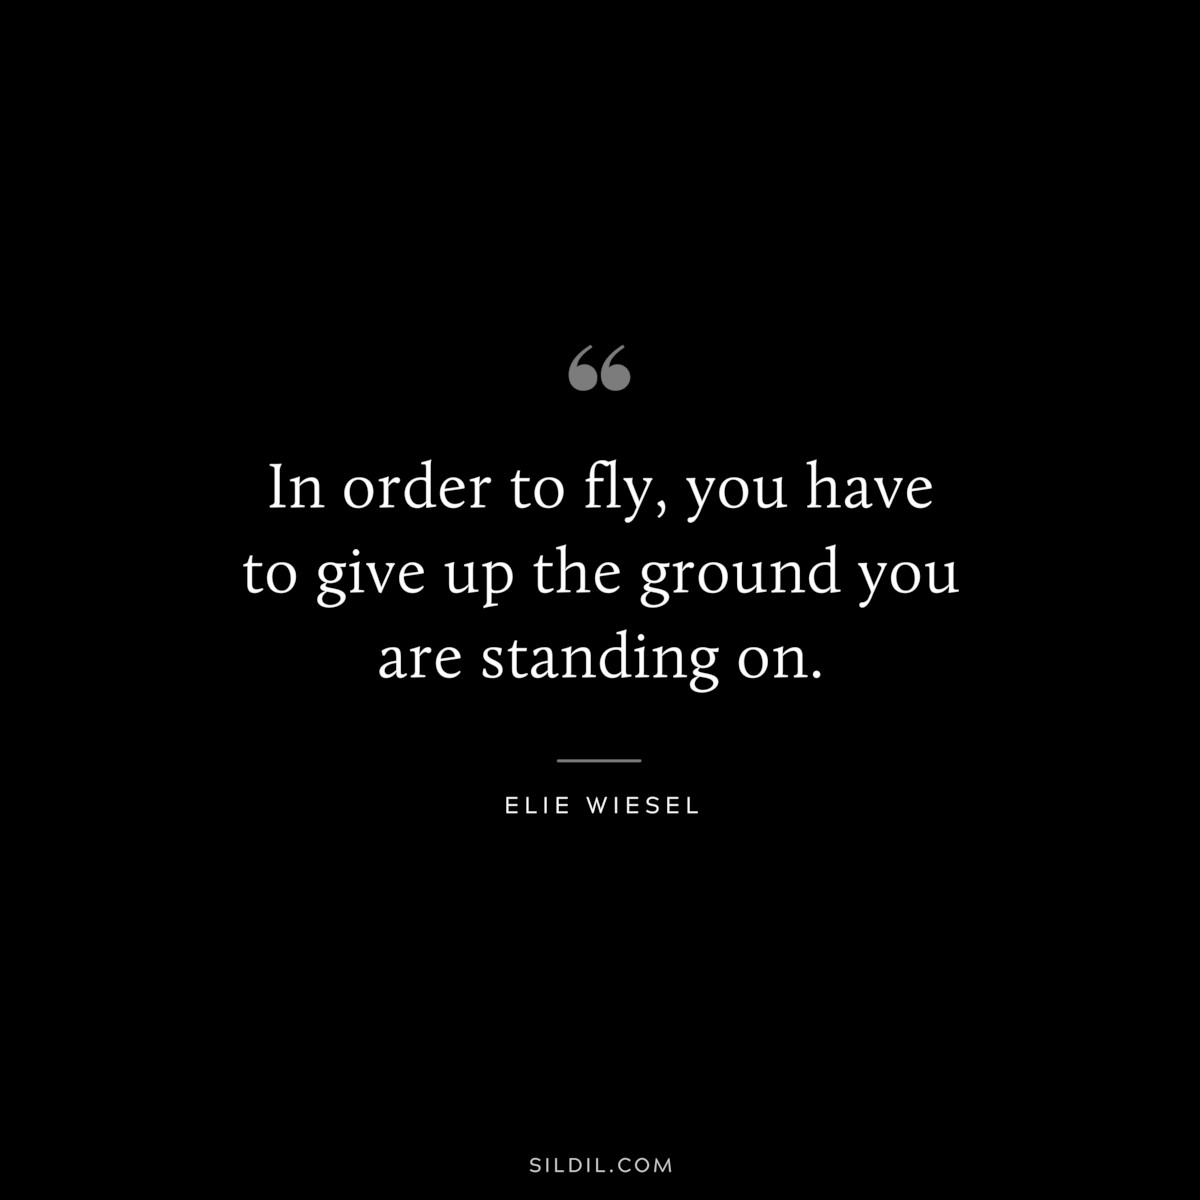 In order to fly, you have to give up the ground you are standing on. ― Elie Wiesel